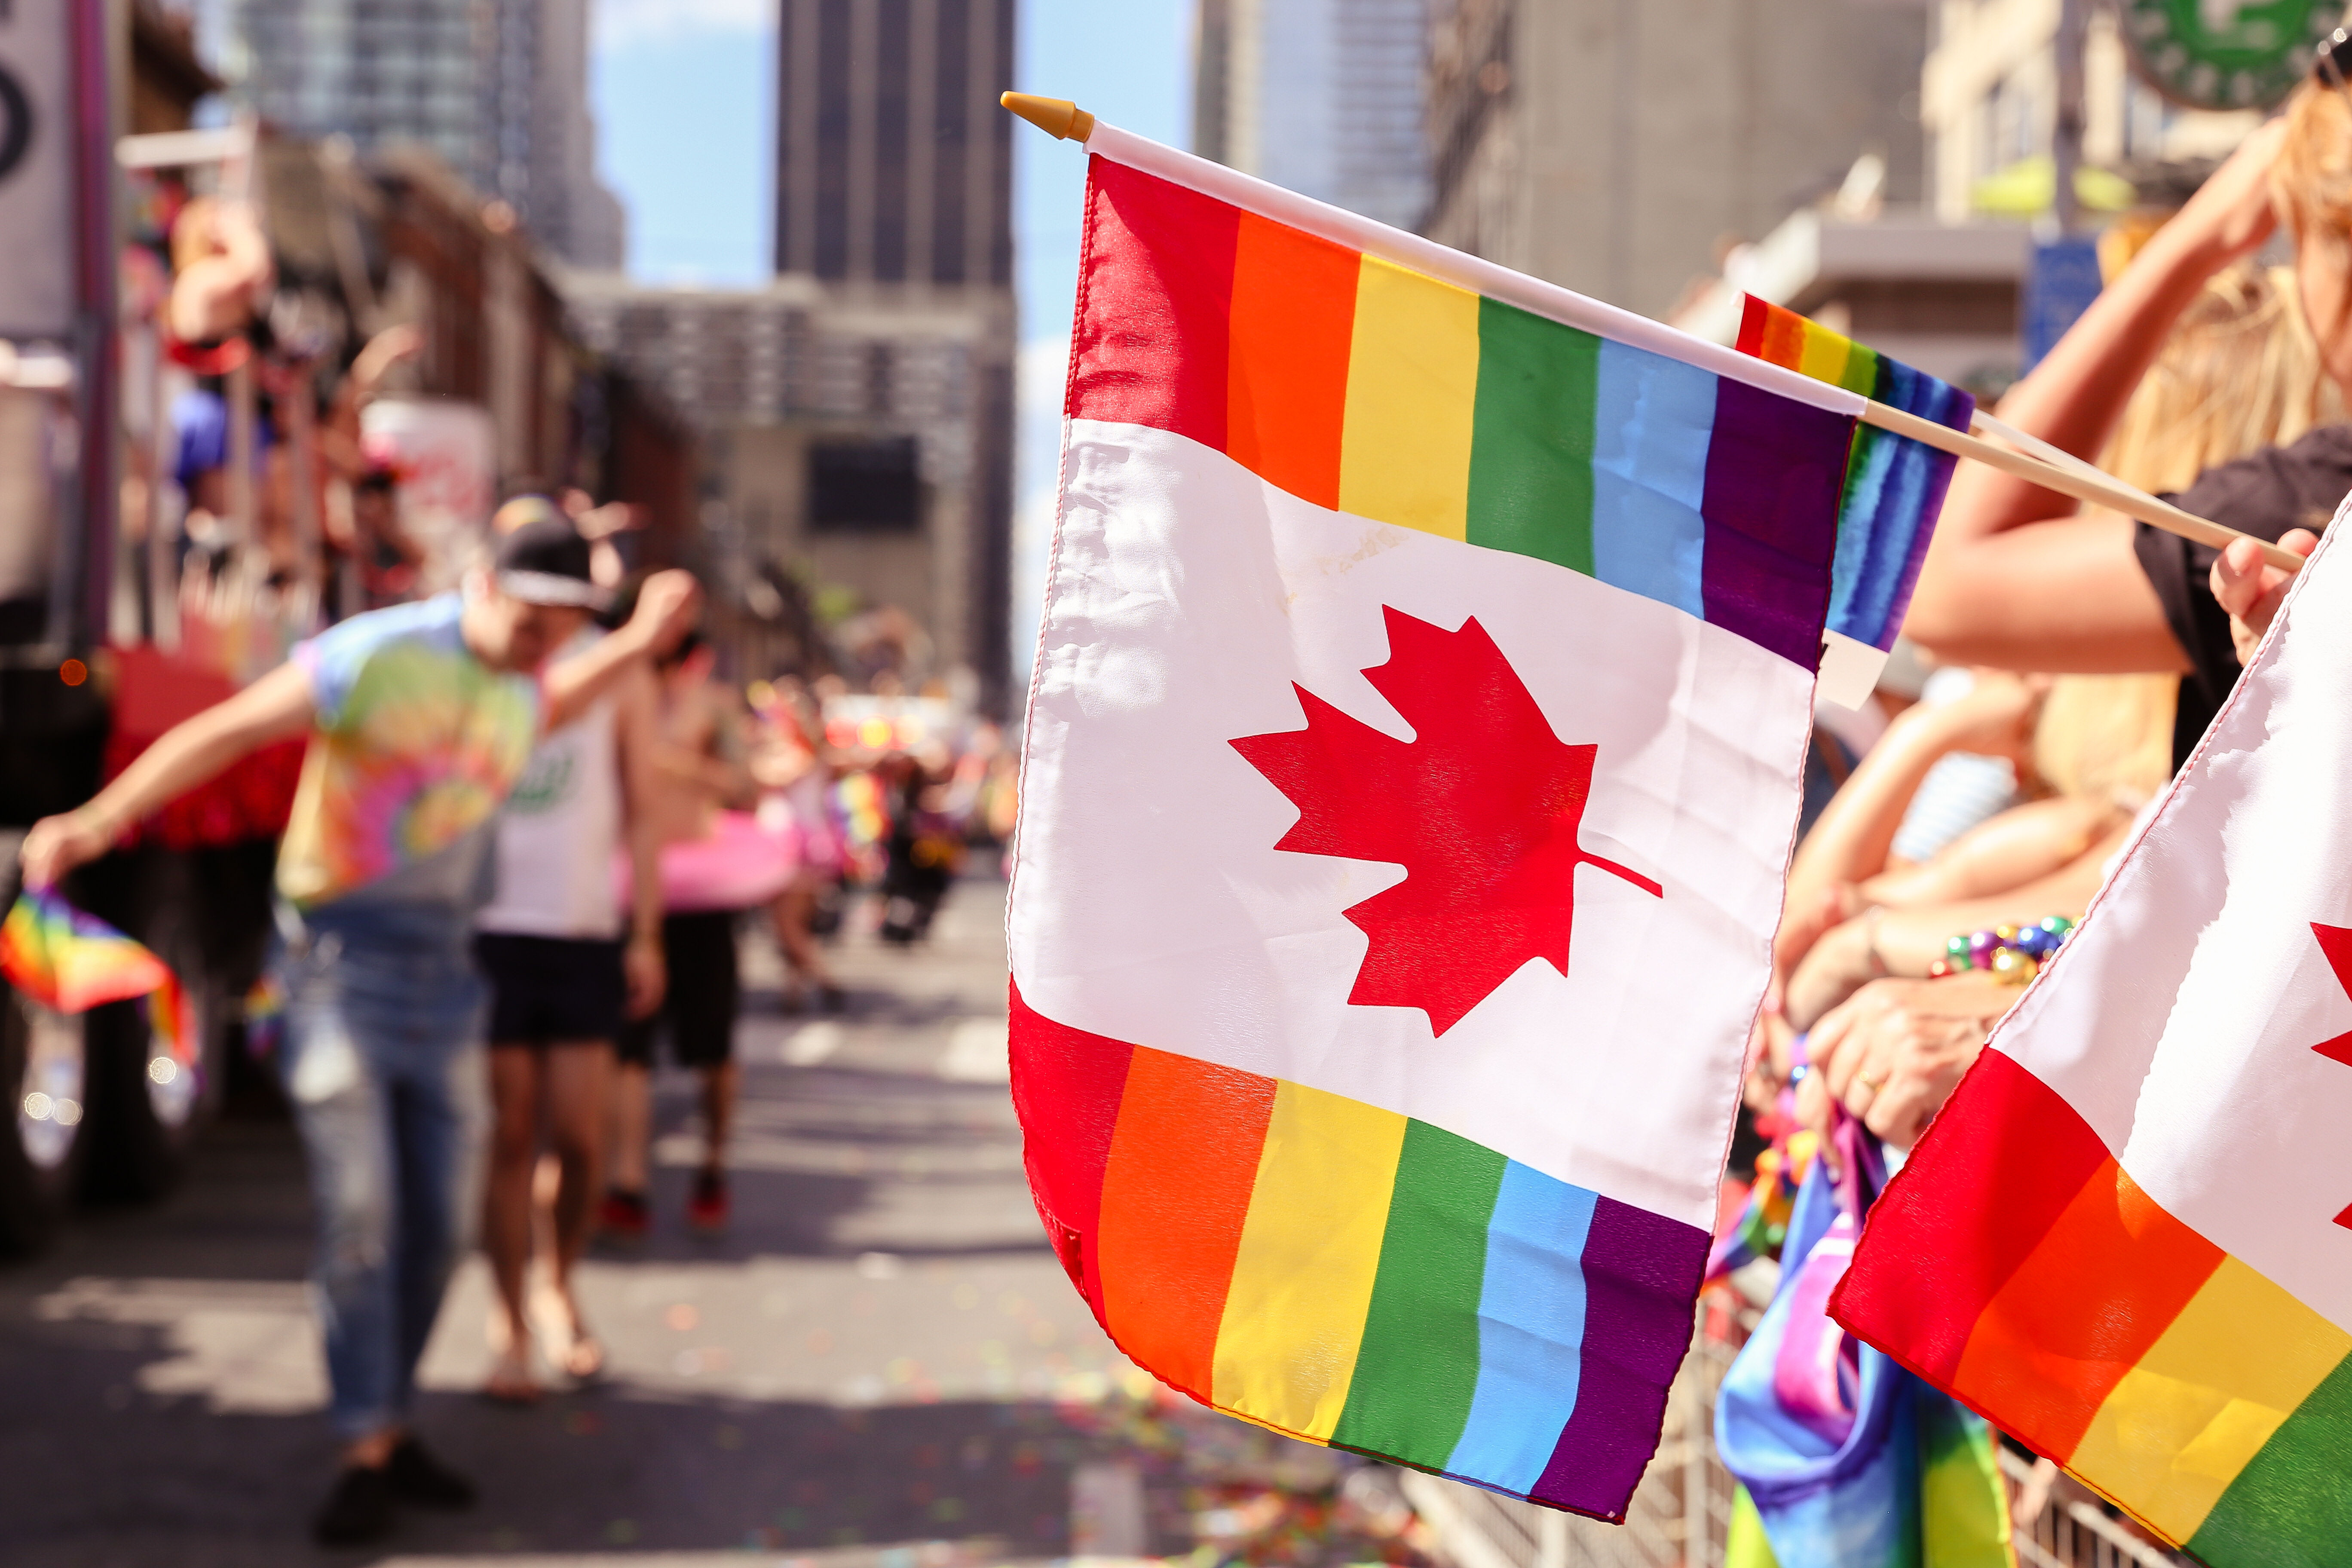 JULY 3, 2016: Crowd waves Canadian rainbow flags while watching floats at Toronto Pride parade.